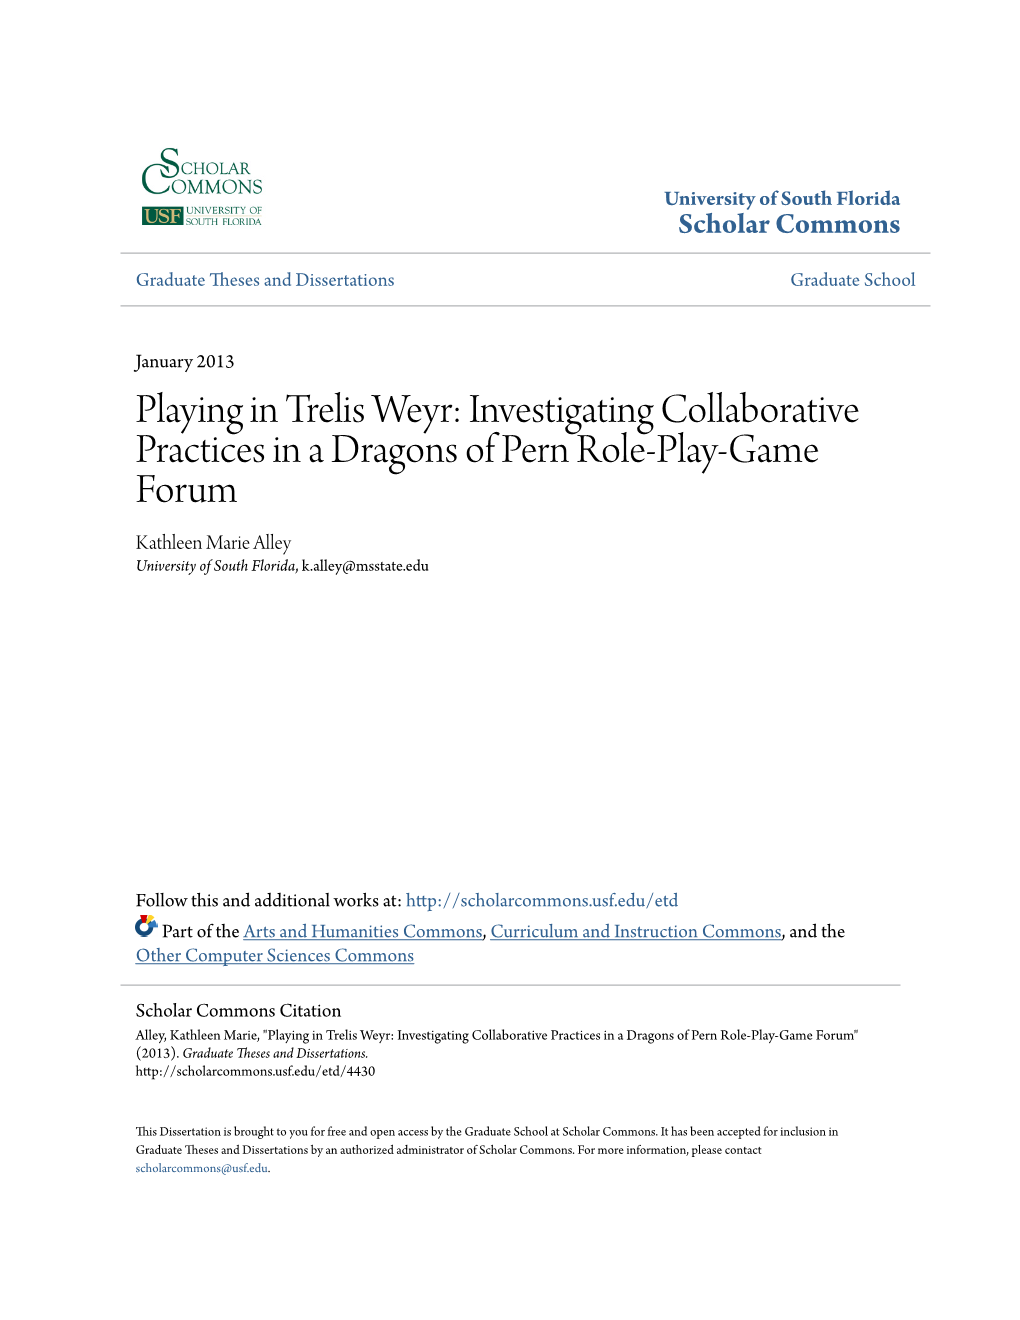 Playing in Trelis Weyr: Investigating Collaborative Practices in a Dragons of Pern Role-Play-Game Forum